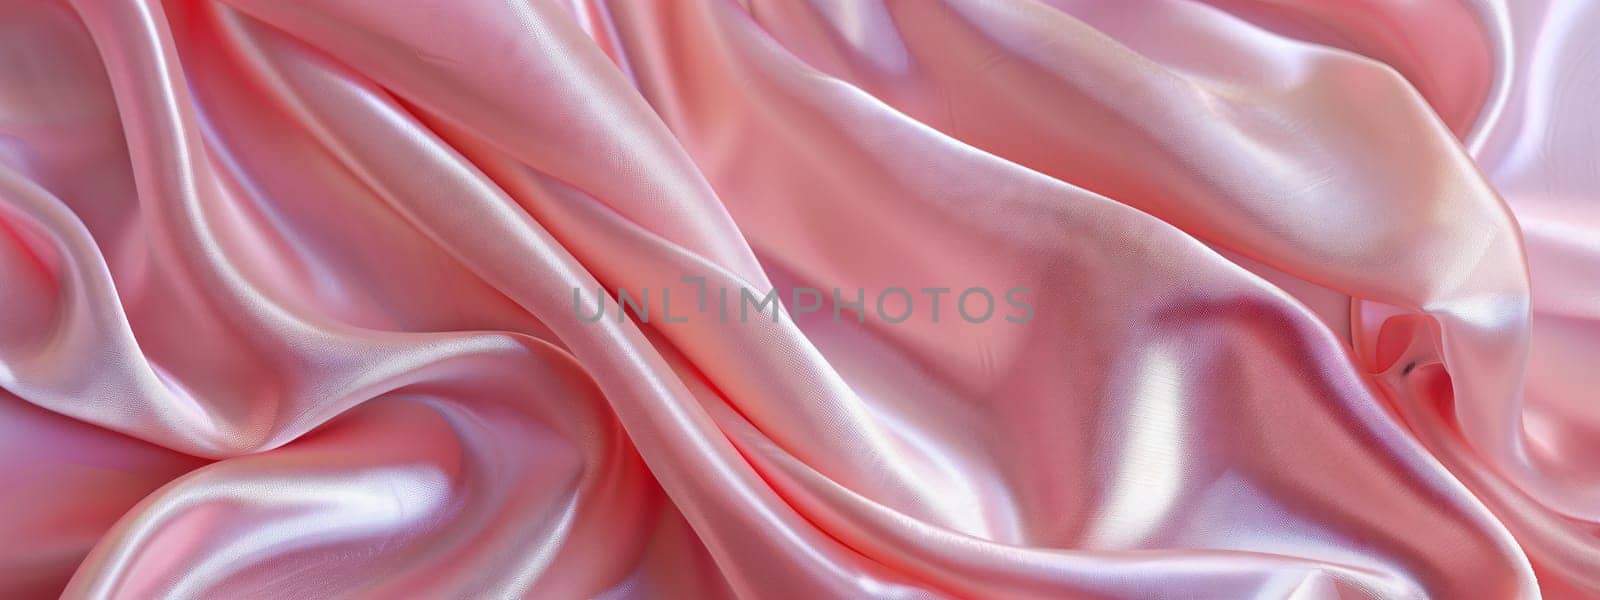 A close up of a beautiful petal pink satin fabric with a delicate plant pattern in shades of magenta and peach, creating a stunning work of art